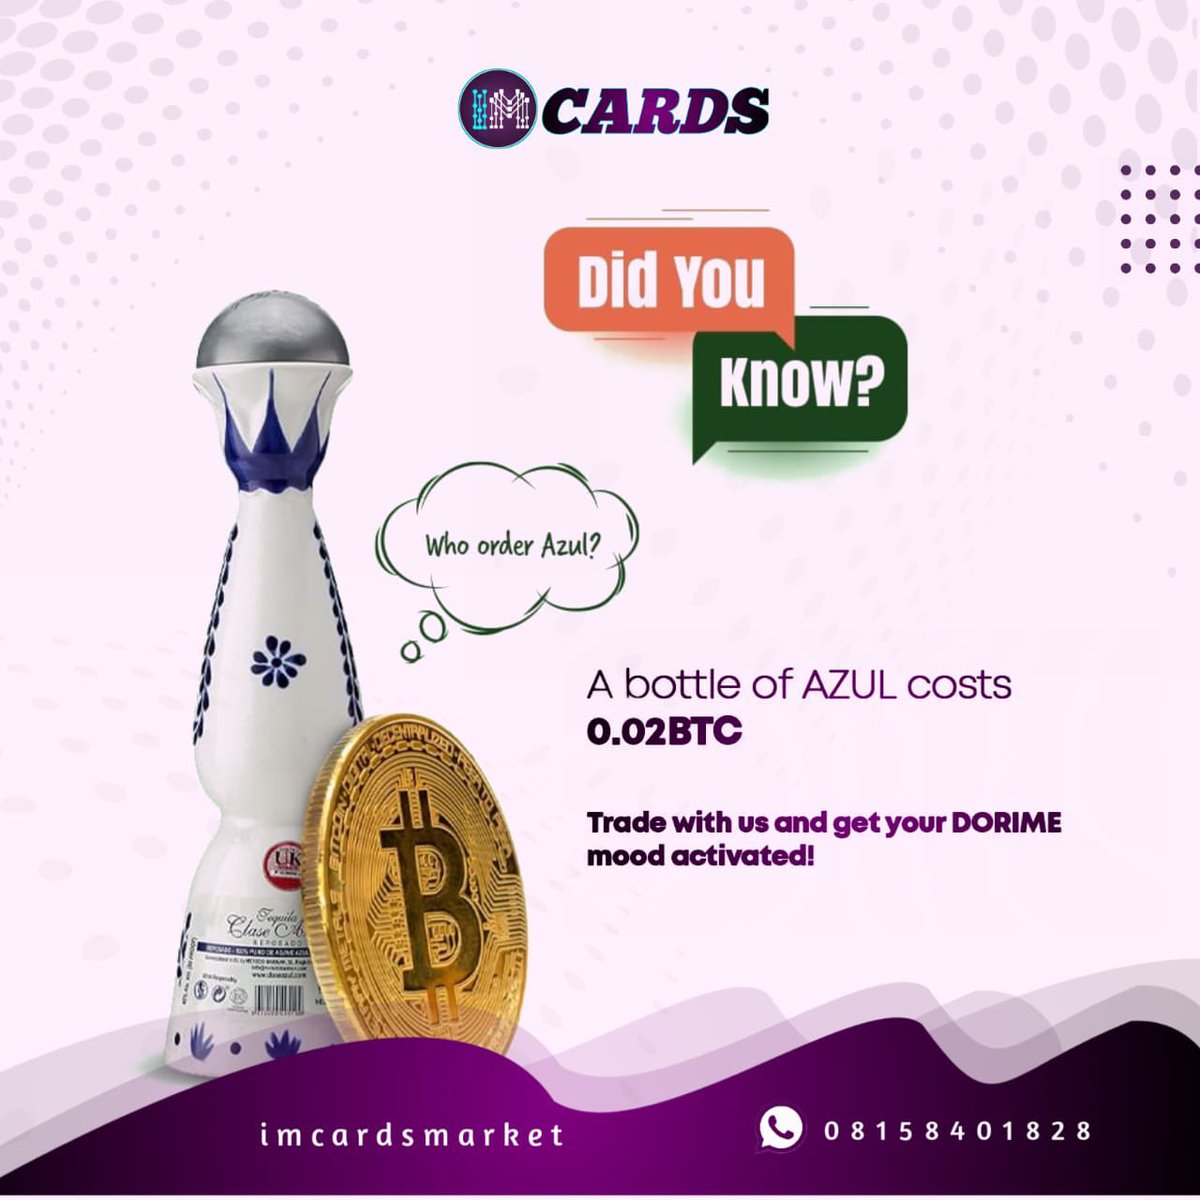 Some Wednesday facts for the house! Trade your giftcards and crypto with us today and get your “dorime” on! Send us a message to get started now!

#explore #explorepage #exploremore #explorenigeria #imcardsmarket #imcards #tech #technology #crypto #cryptocurrency #cryptotrading